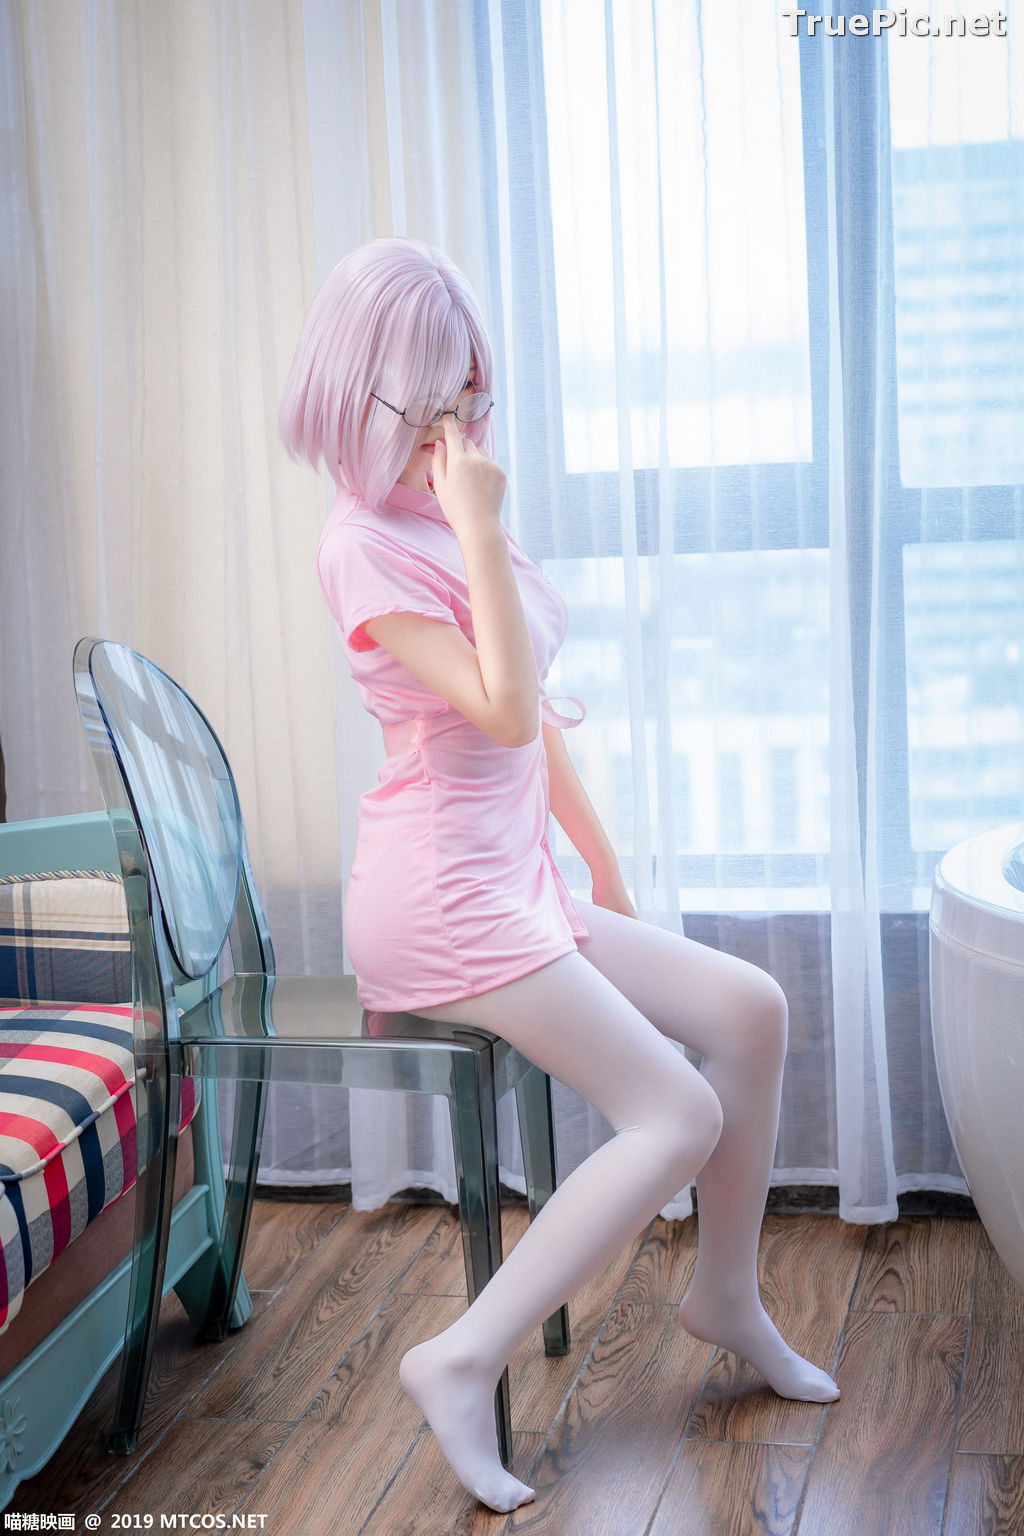 Image [MTCos] 喵糖映画 Vol.033 – Chinese Cute Model - Pink Nurse Cosplay - TruePic.net - Picture-21